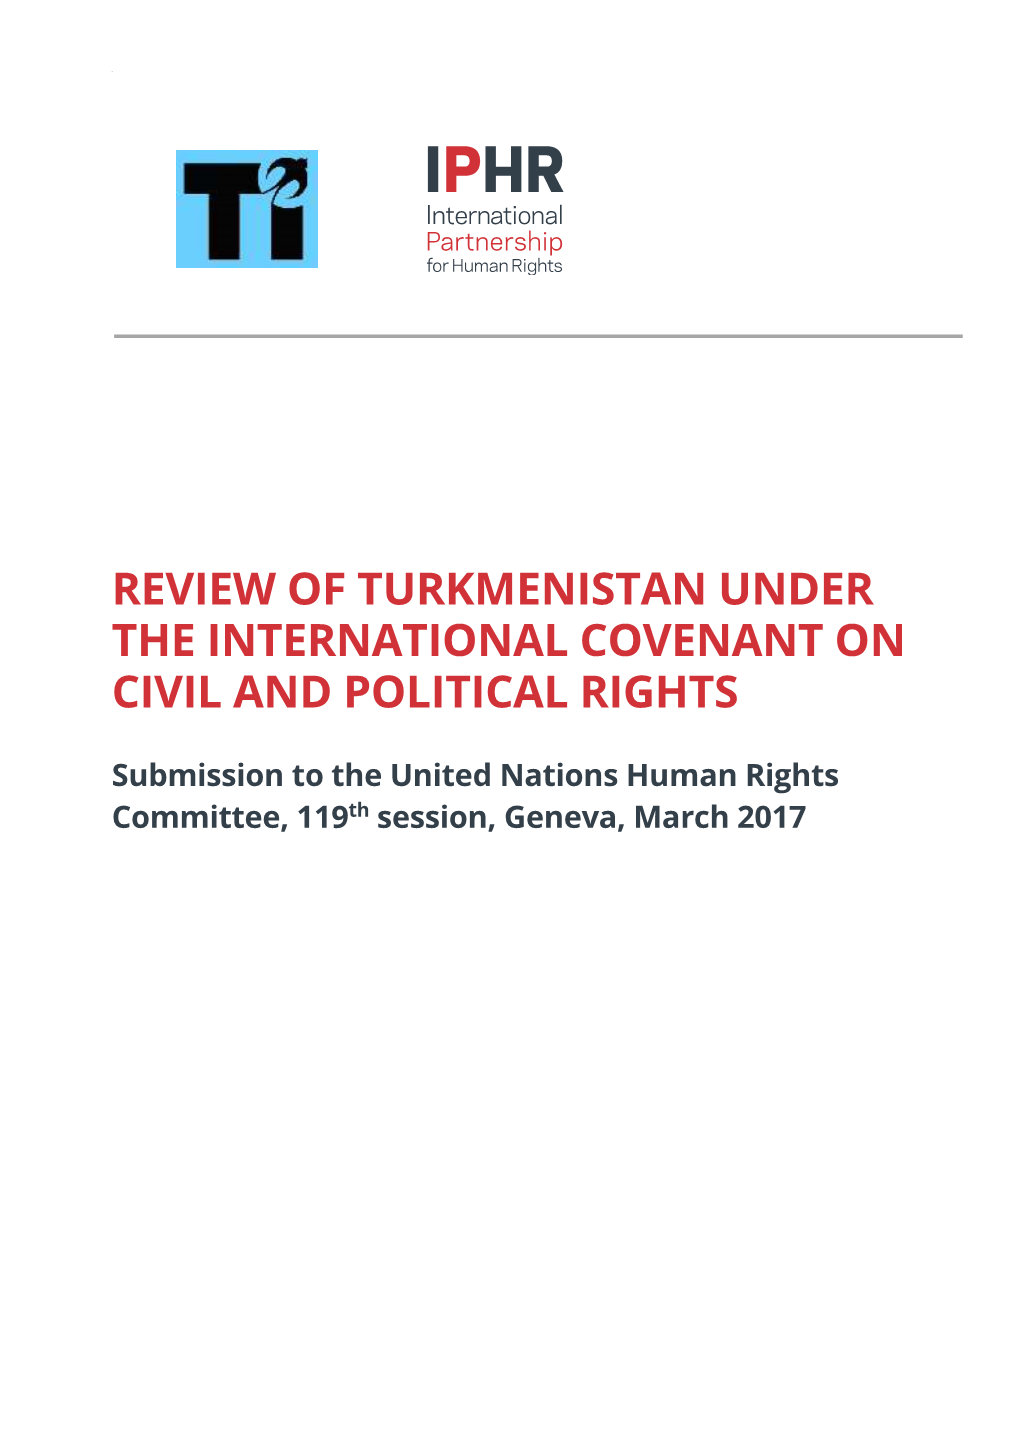 Review of Turkmenistan Under the International Covenant on Civil and Political Rights